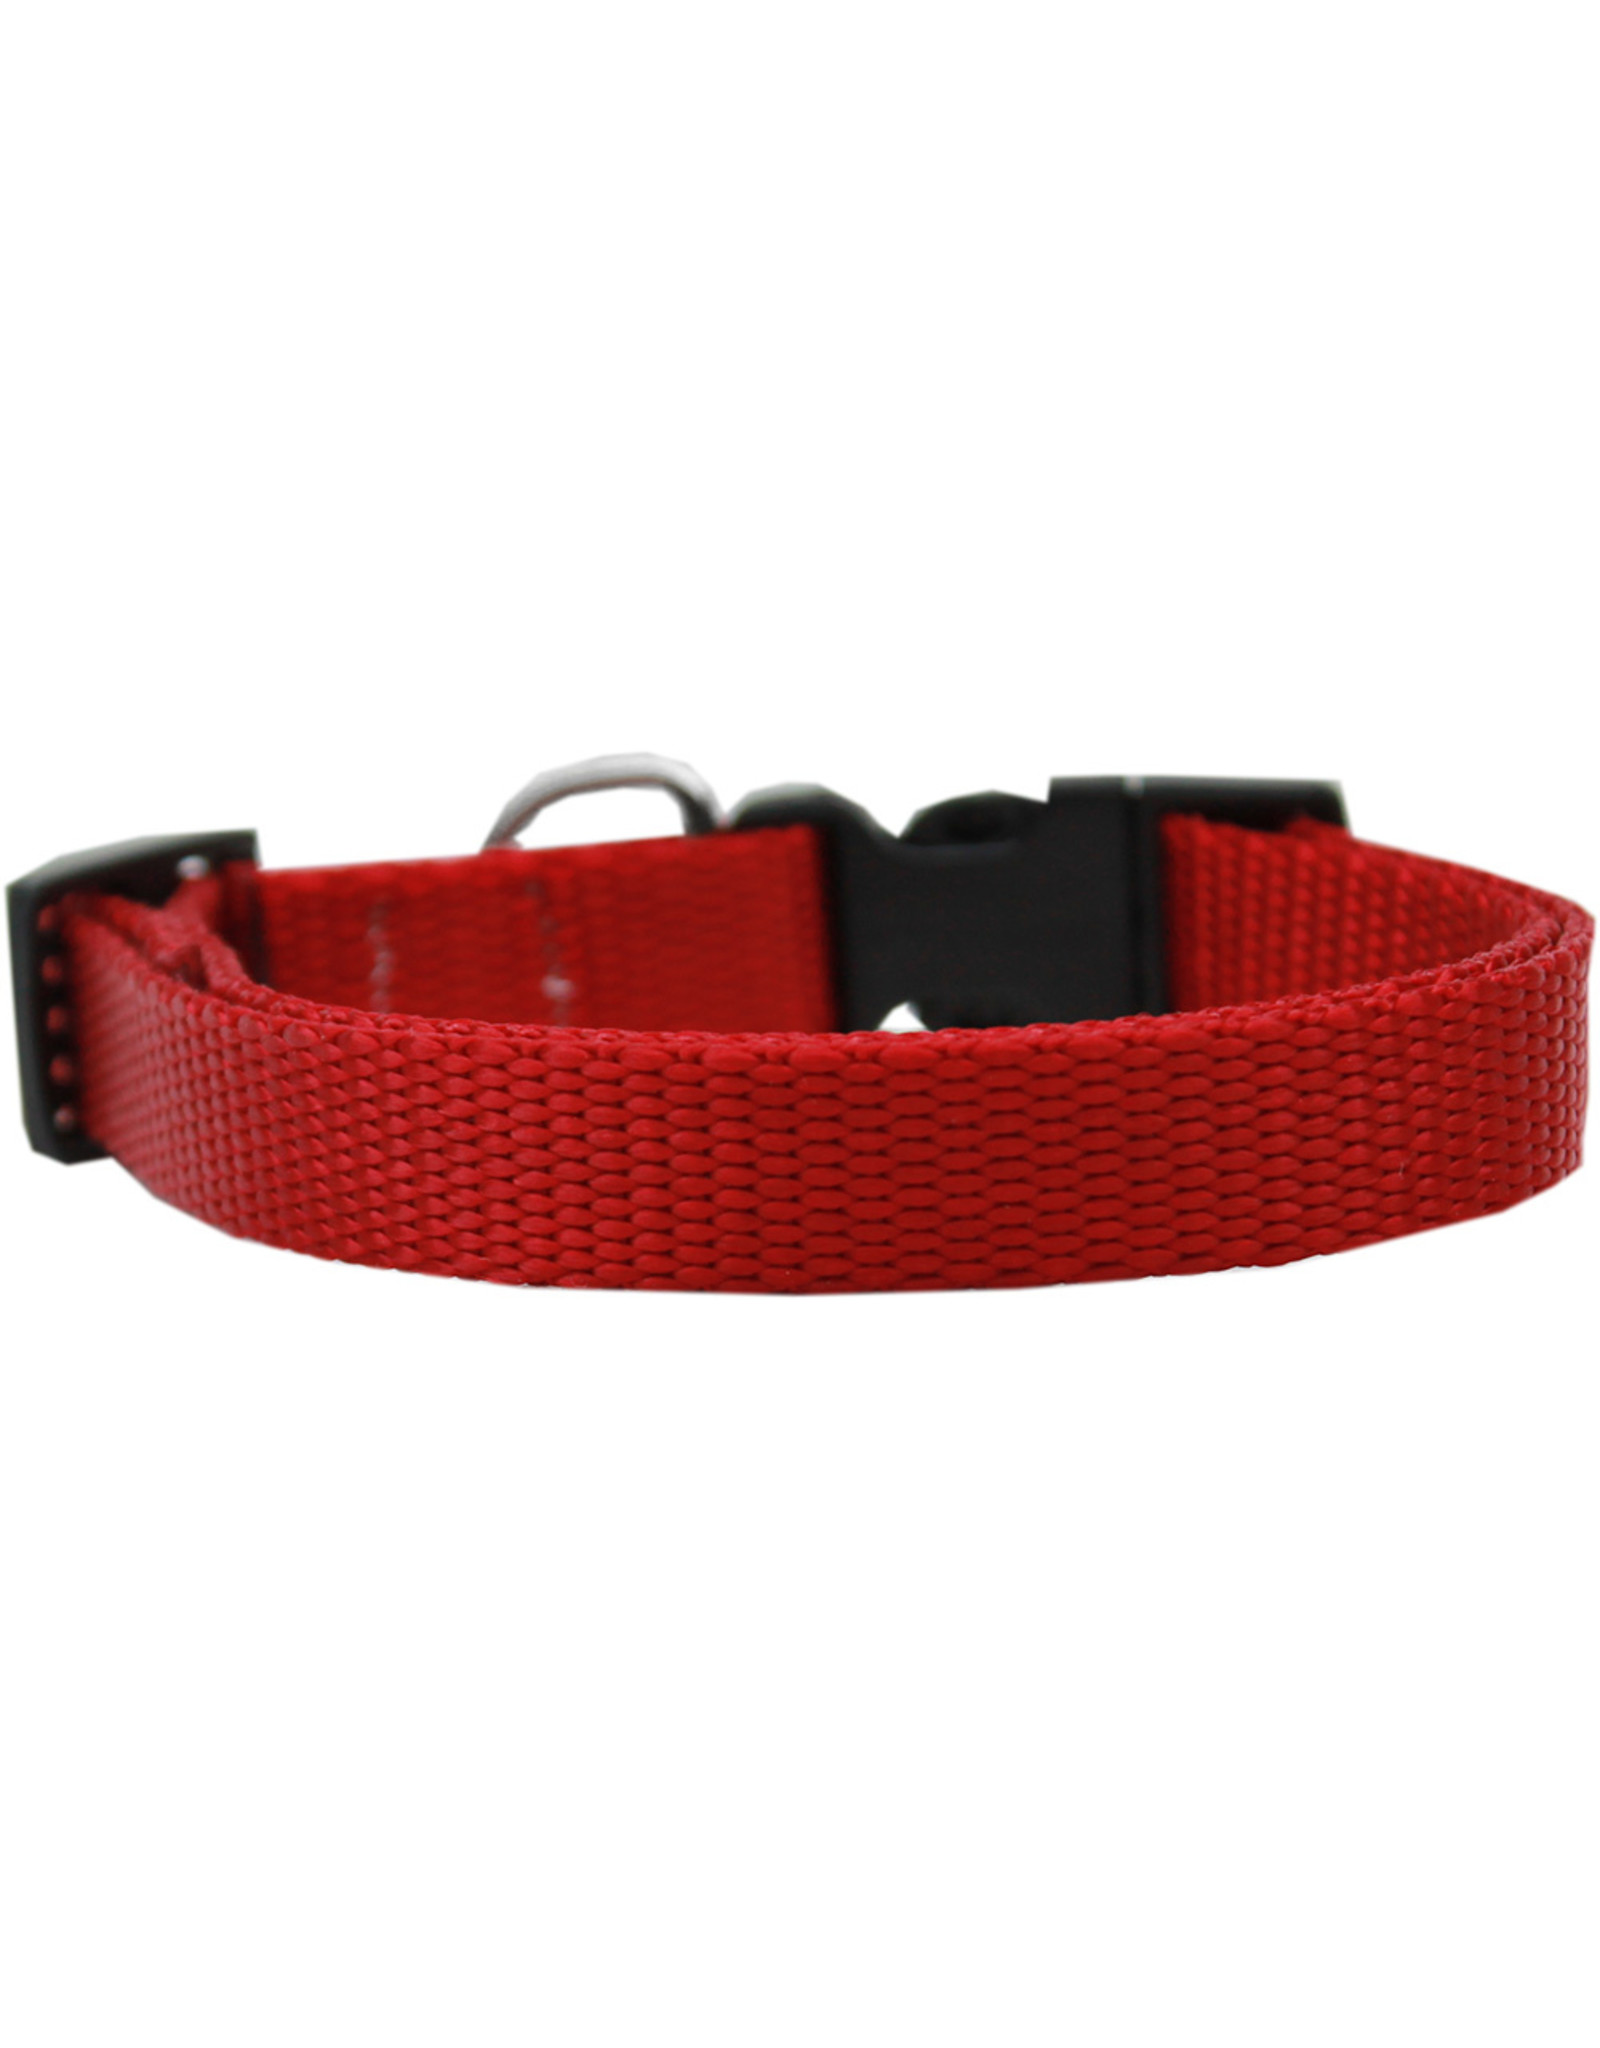 Mirage Pet Products MIRAGE PET PRODUCTS PLAIN NYLON SAFETY CAT COLLAR